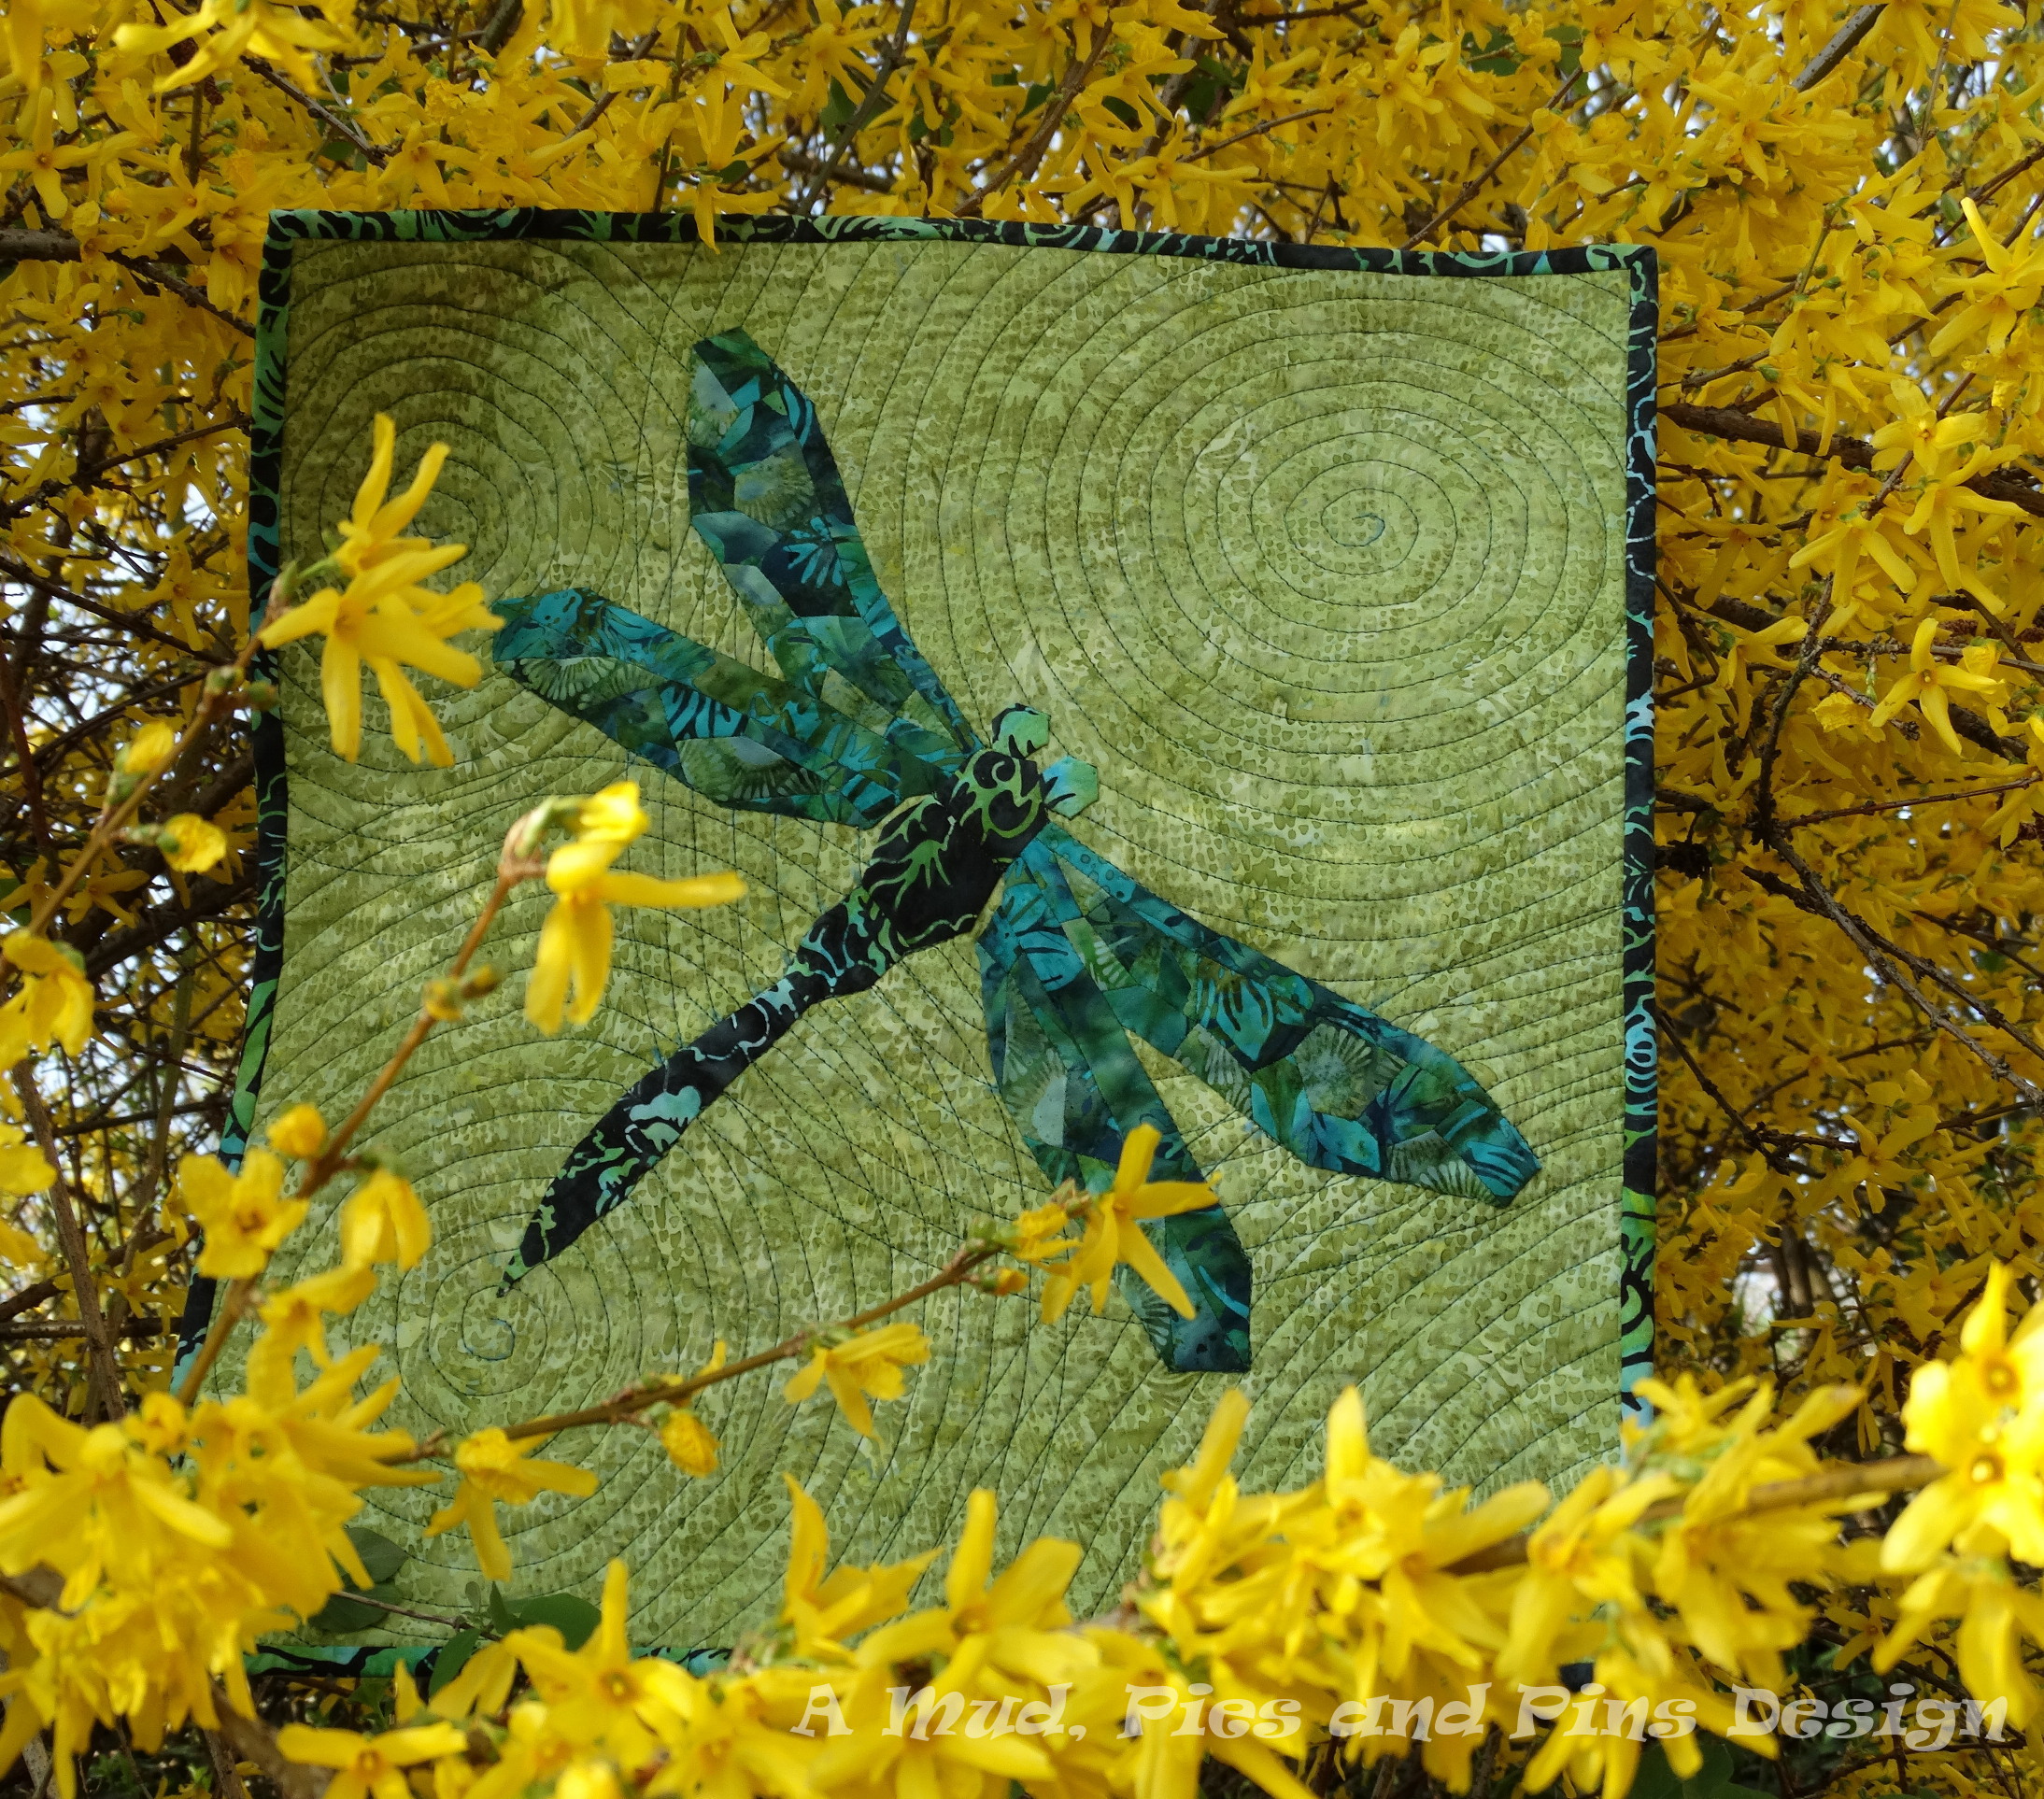 EPP dragonfly mini quilt "Flying in Circles" | Mud, Pies and Pins